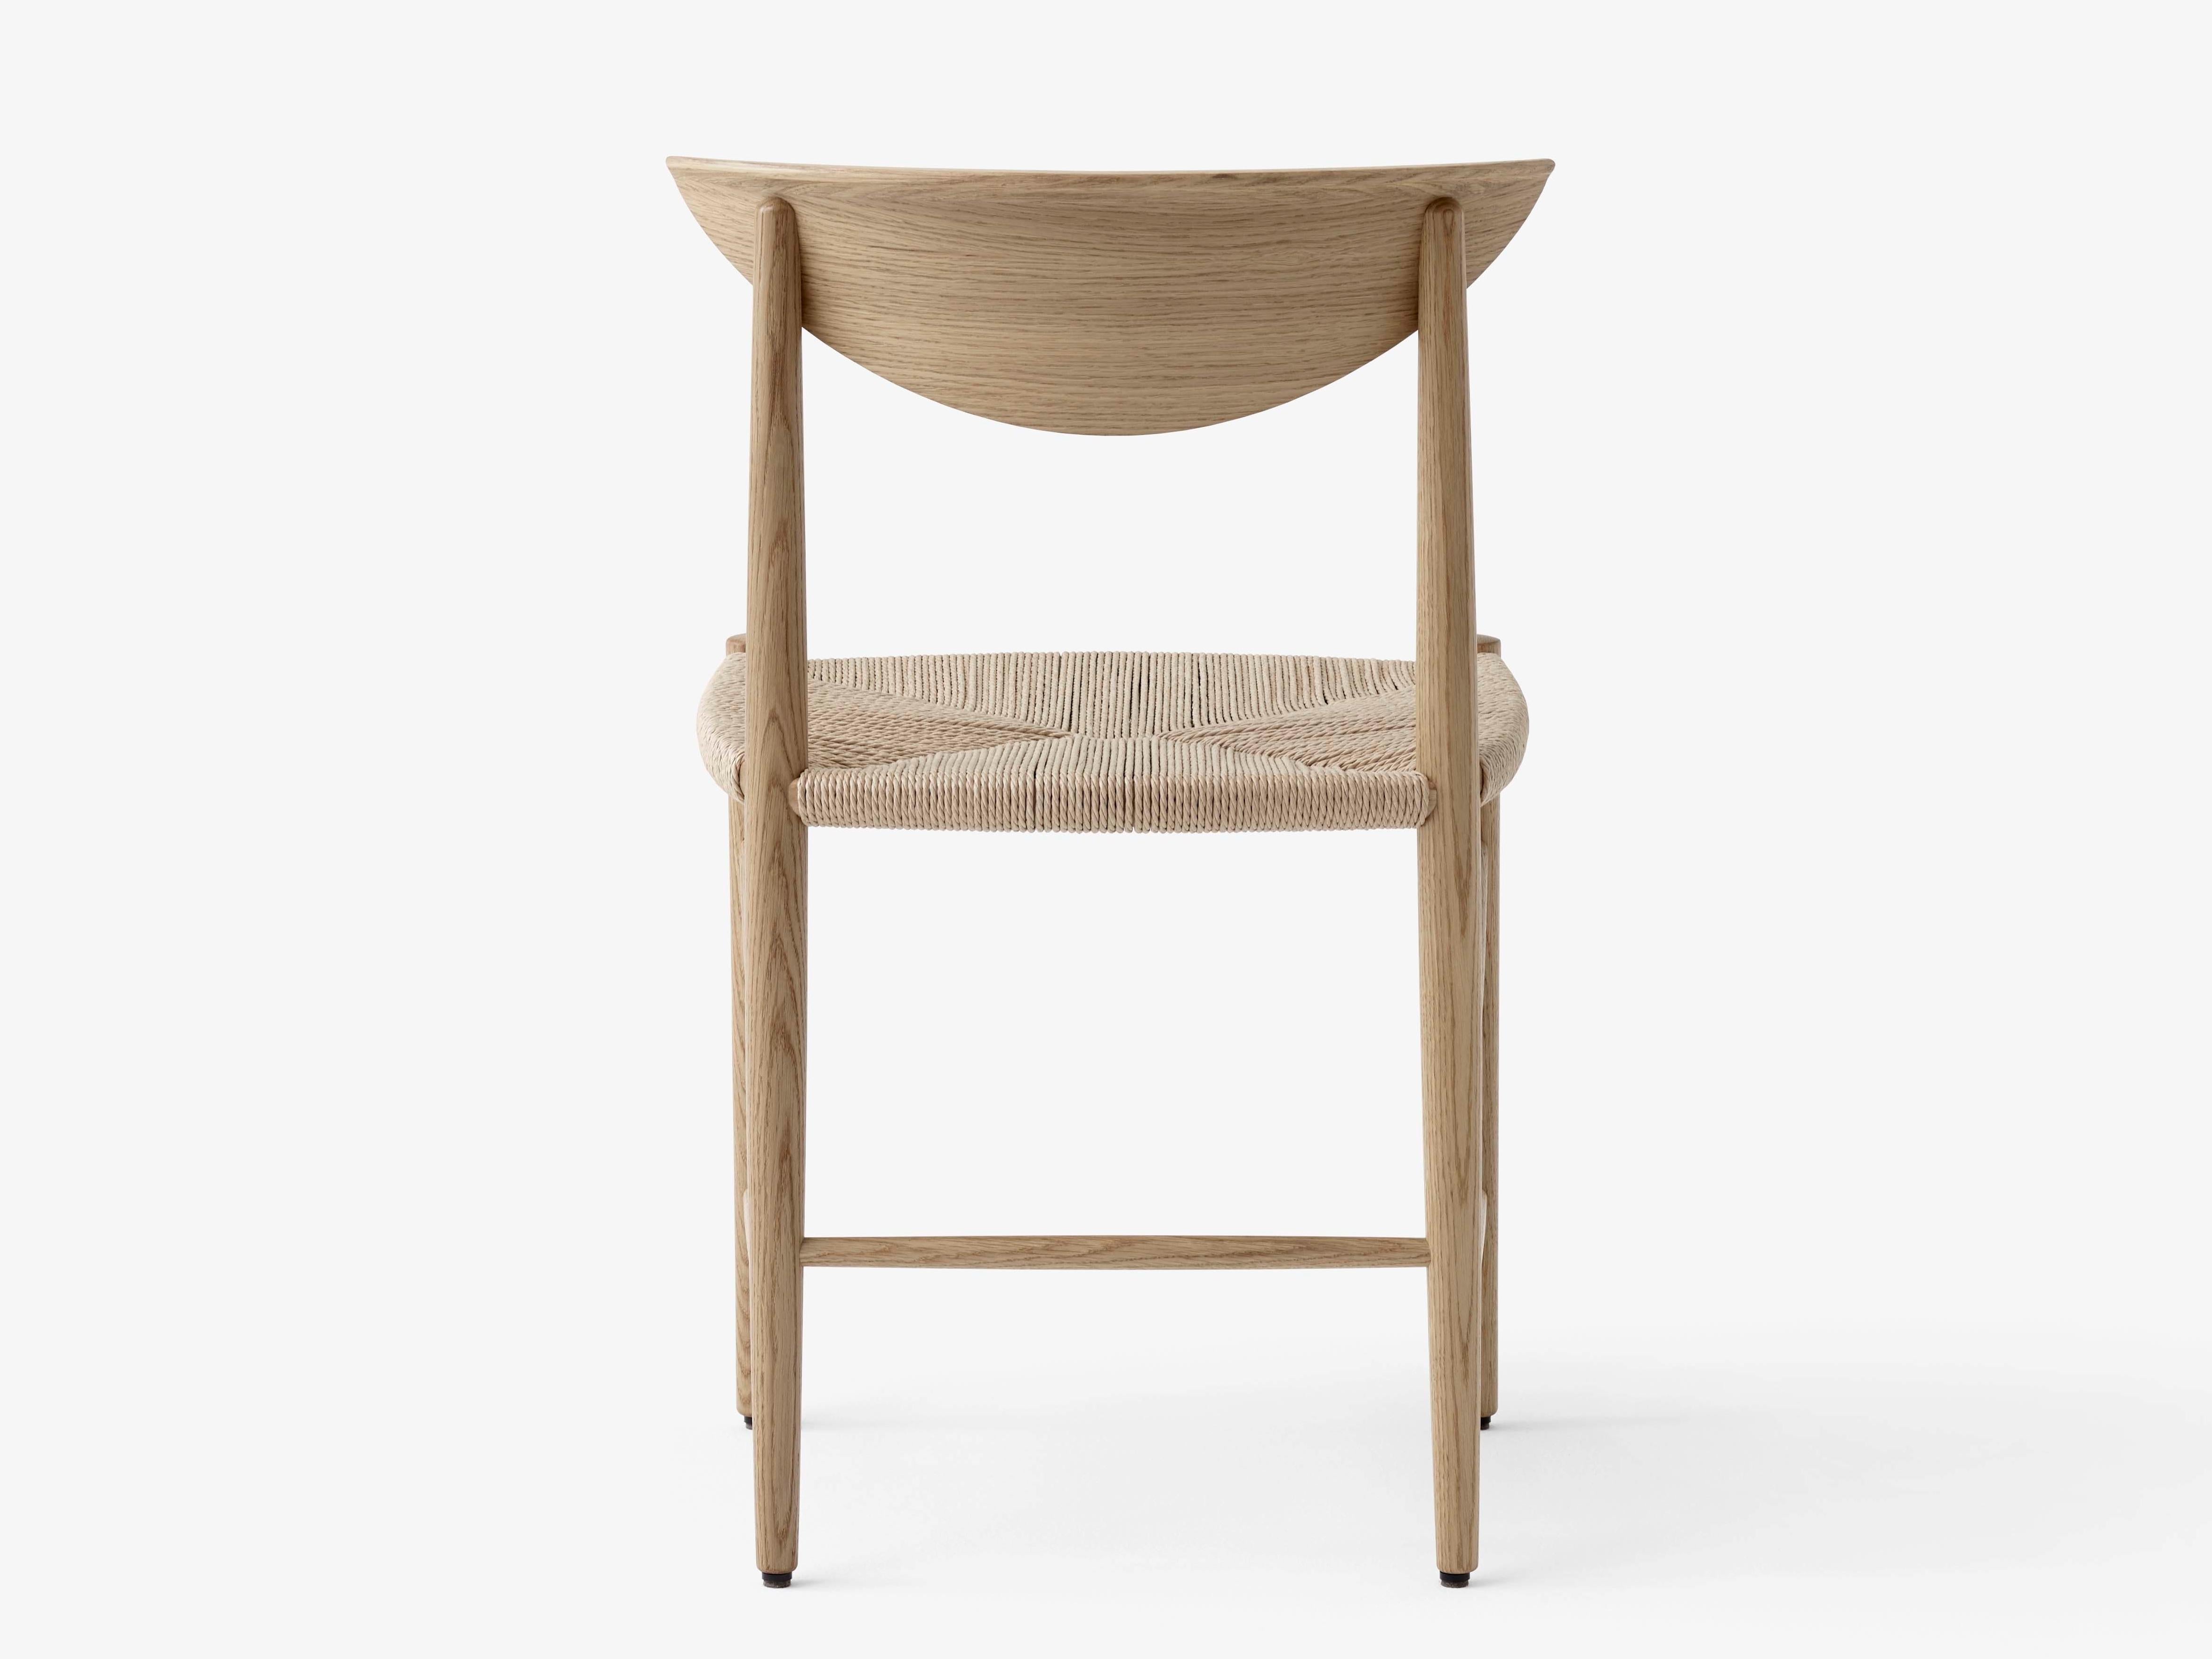 Drawn chair model 316 by Hvidt and Mølgaard. New edition. The model 316 chair by Hvidt & Mølgaard stands out as a definitive piece of Danish design. Relying upon traditional craftsmanship techniques and built out of organic materials, it brings a